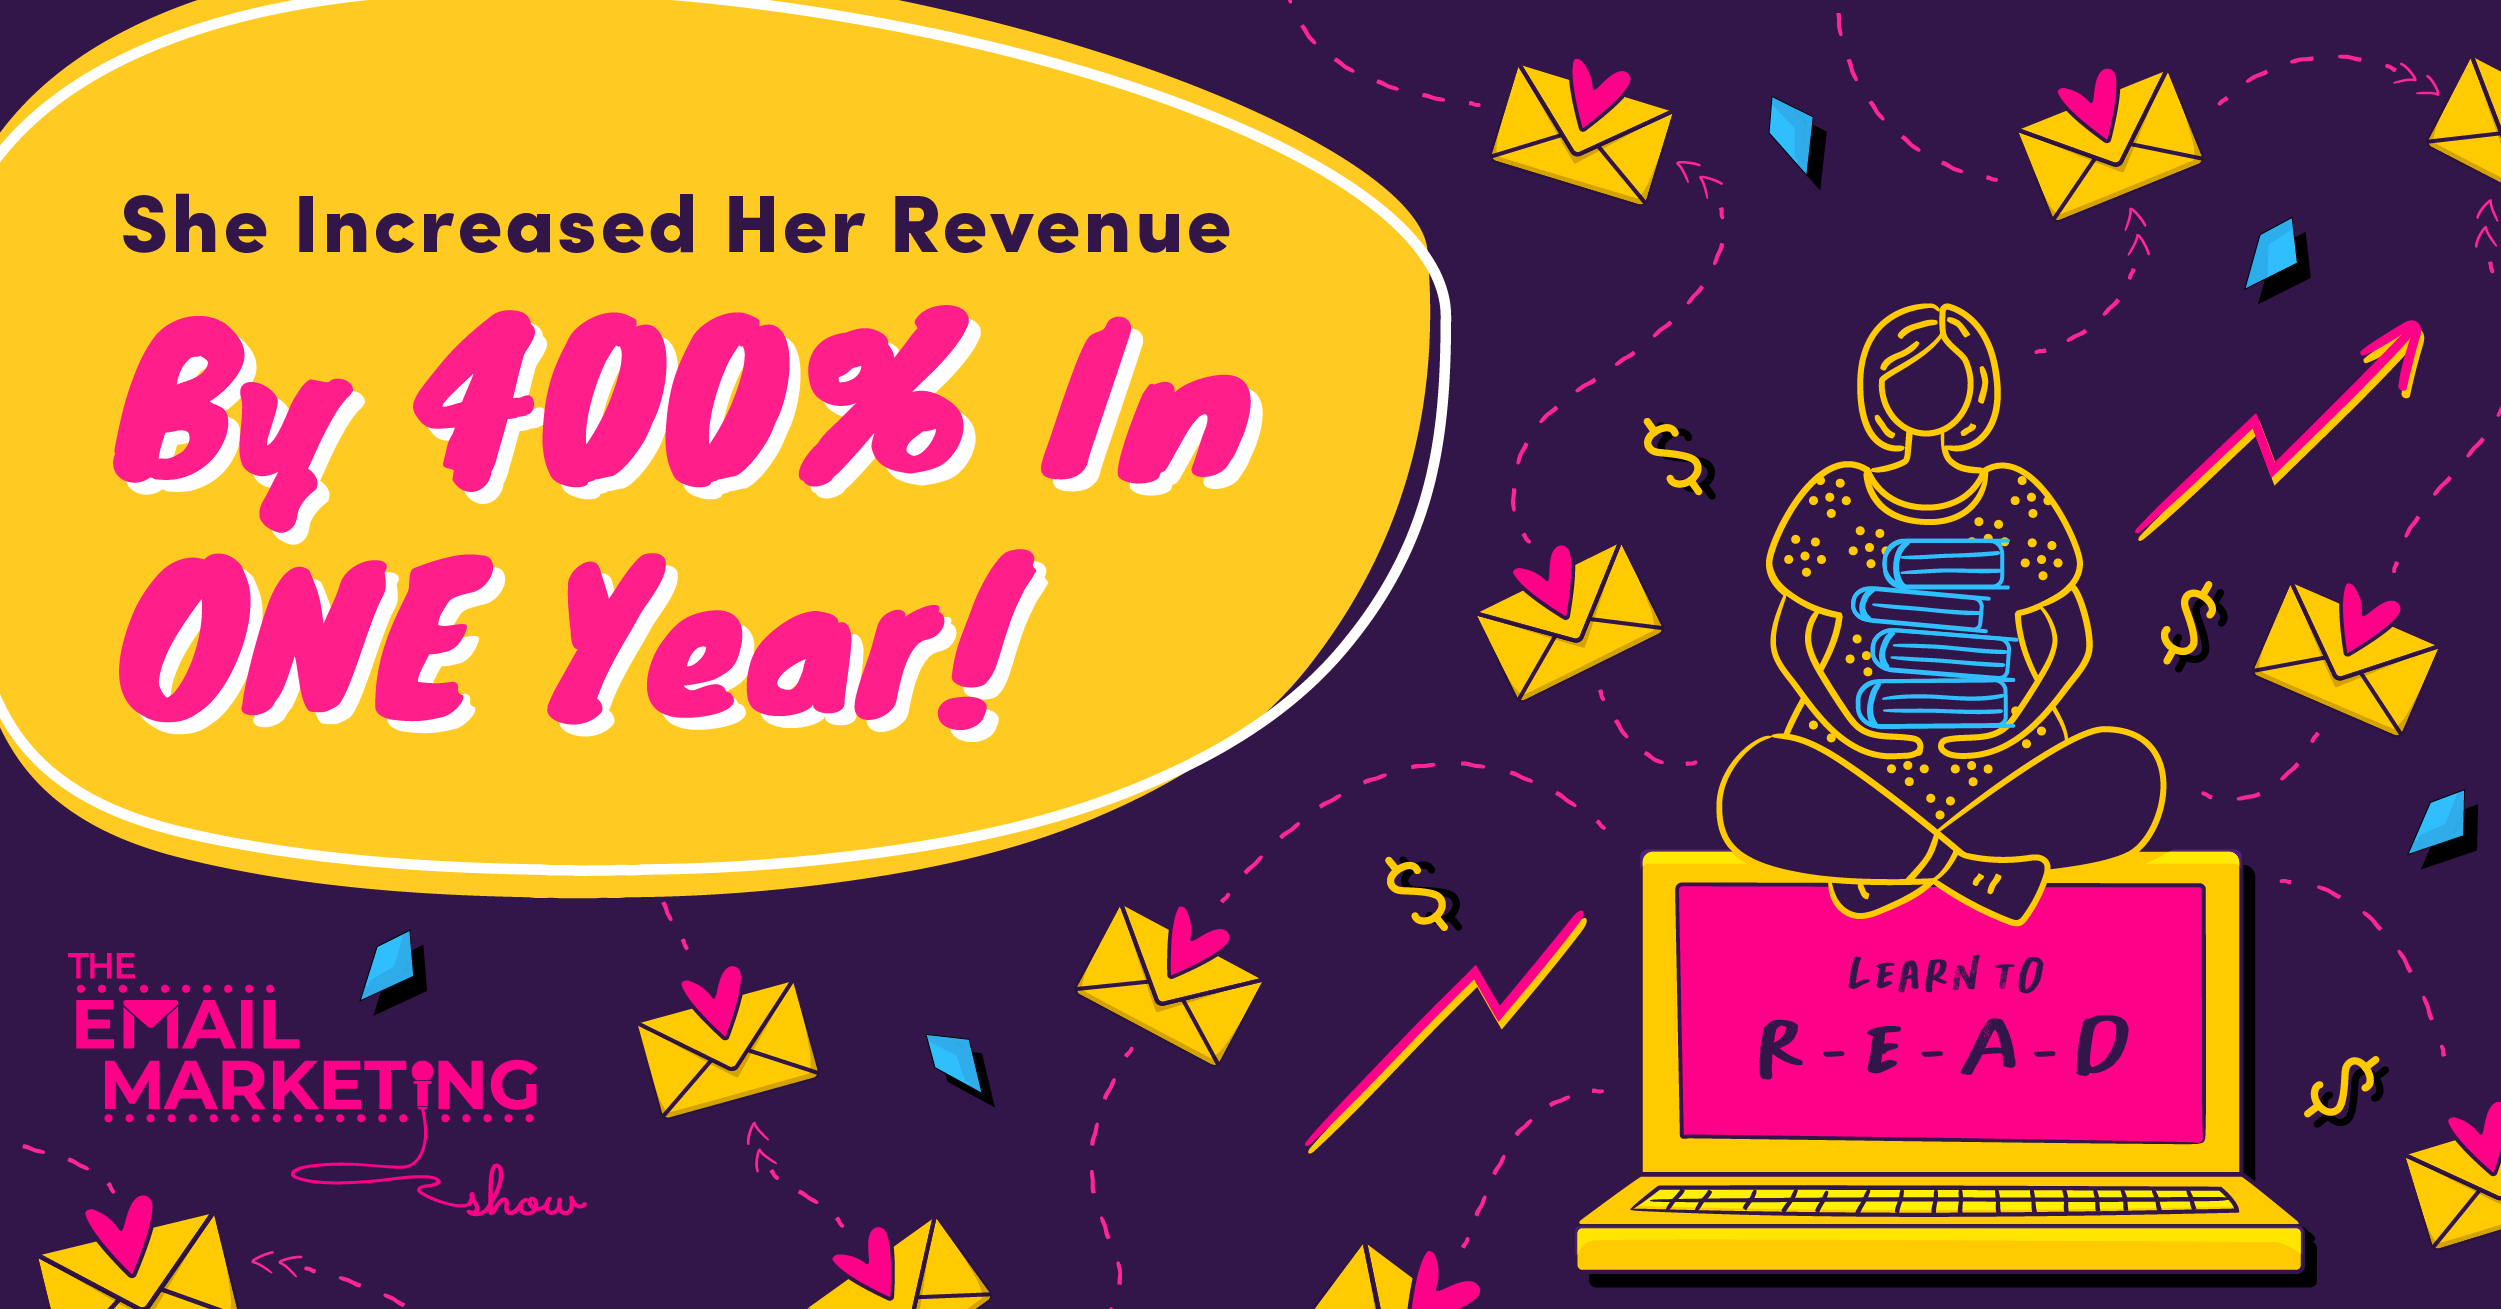 Increased Revenue With Email Marketing